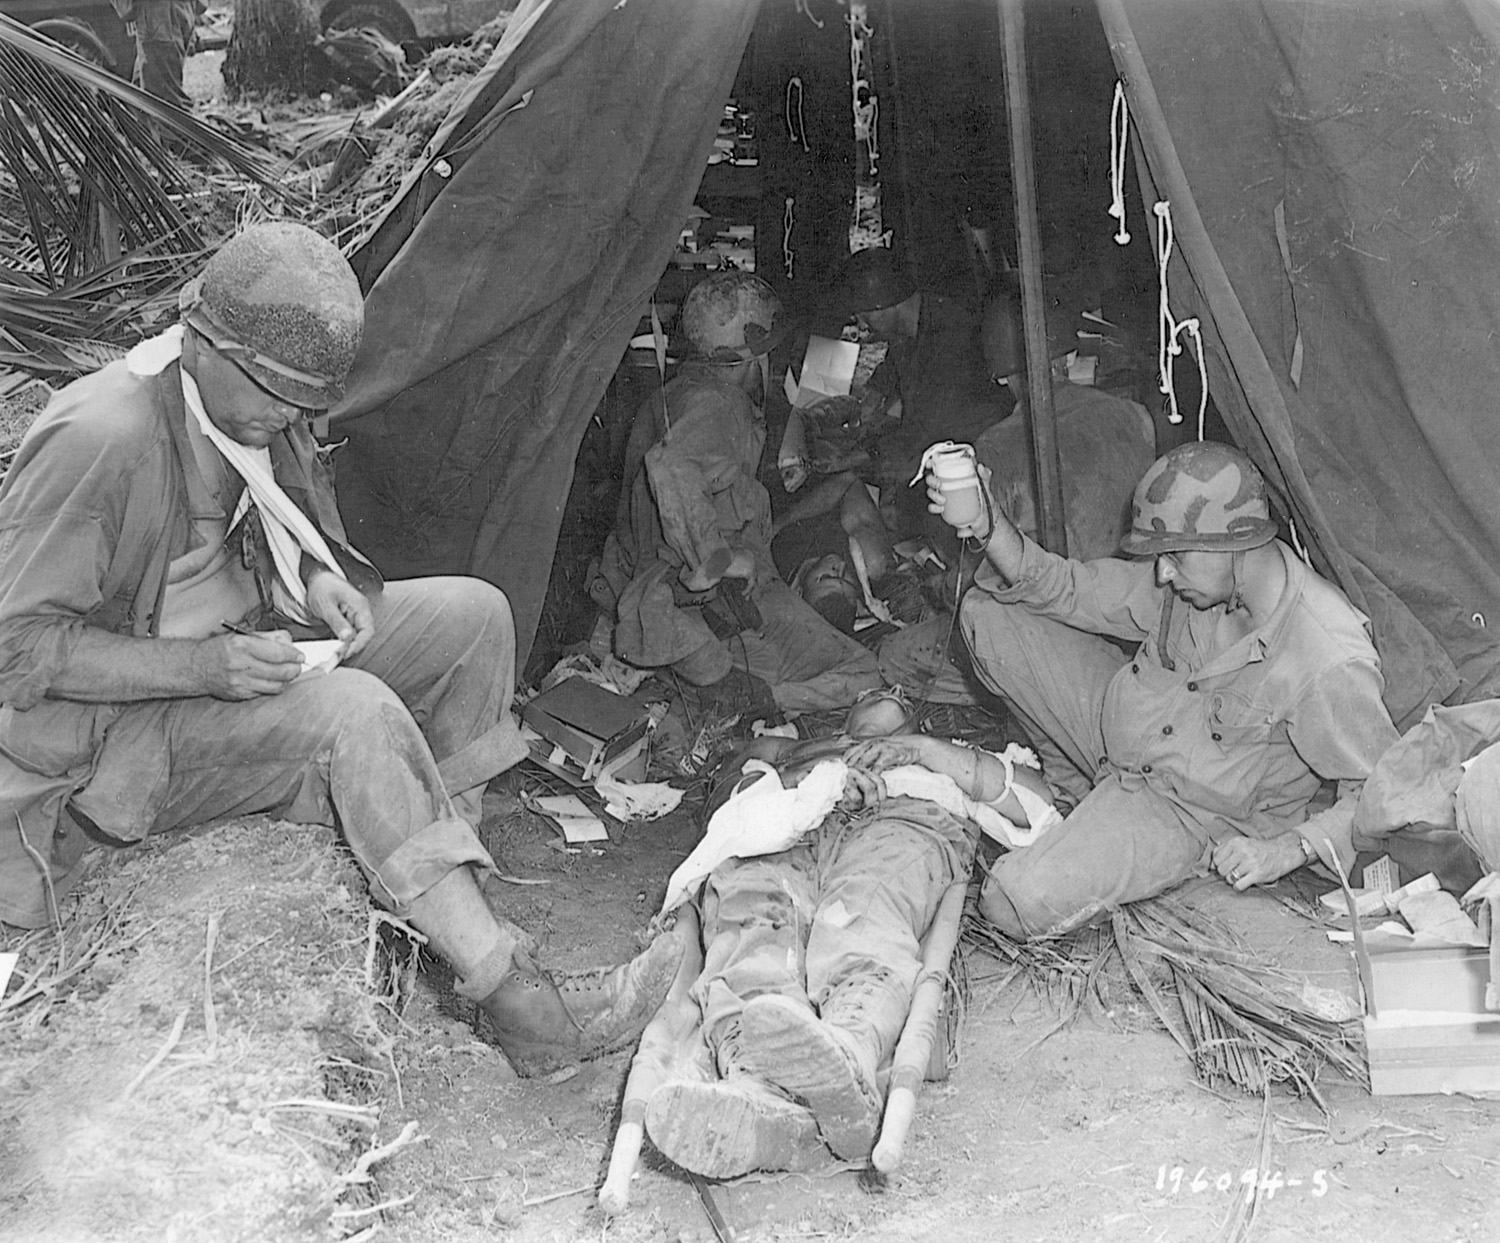 A wounded U.S. soldier receives lifesaving plasma from medics on the island of Leyte in the Philippines.